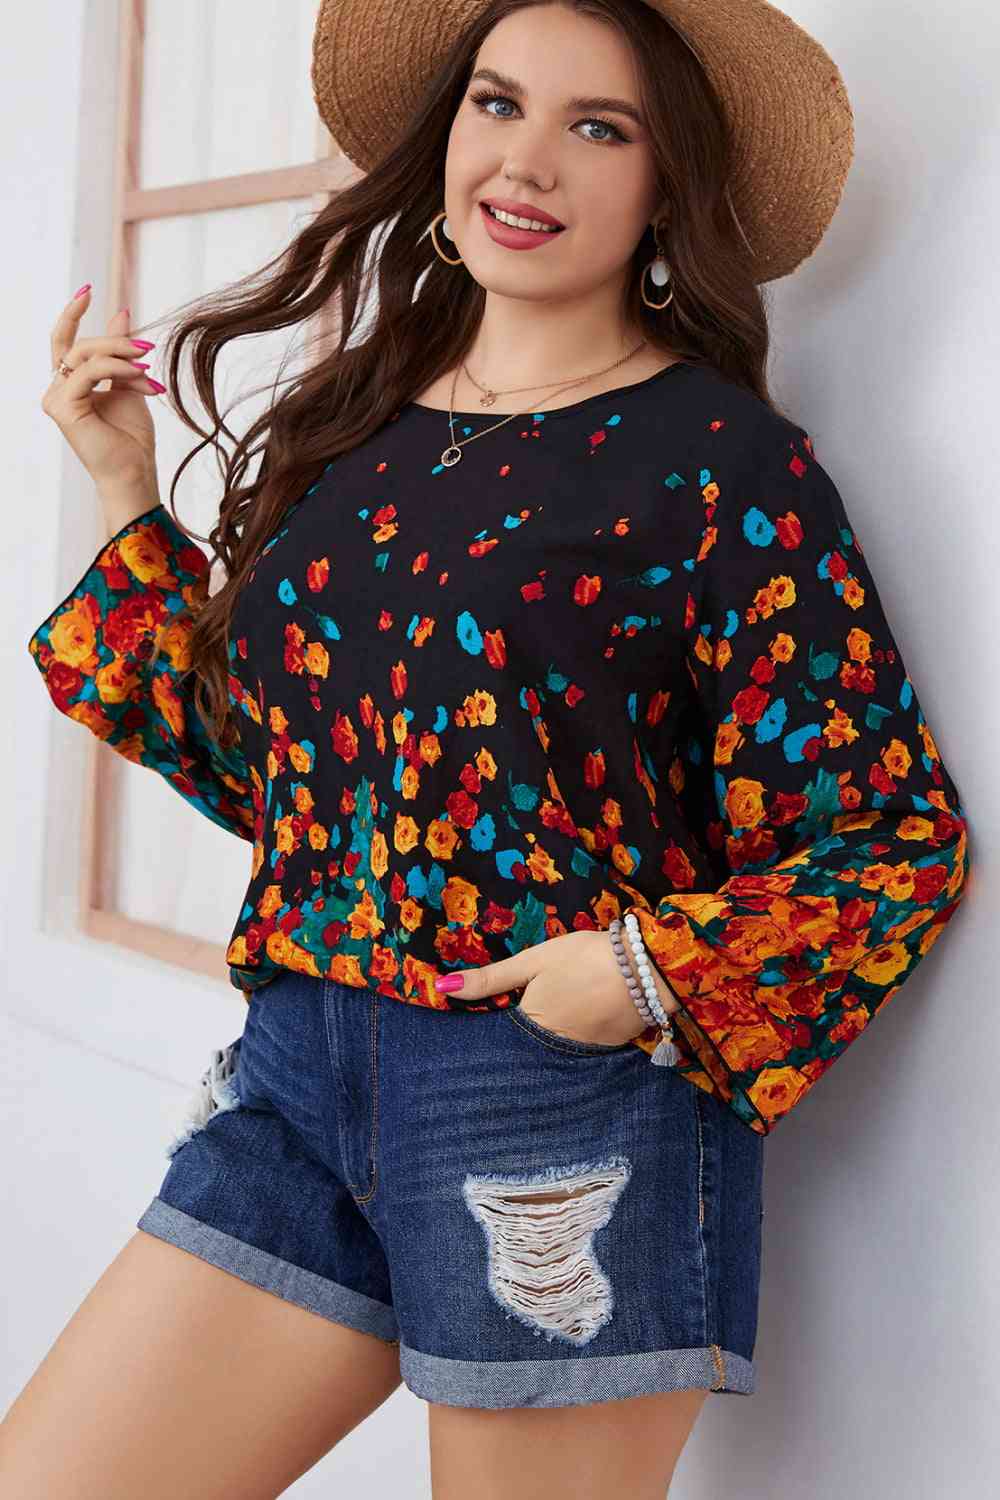 Melo Apparel Plus Size Floral Round Neck Long Sleeve Blouse - Just Enuff Sexy